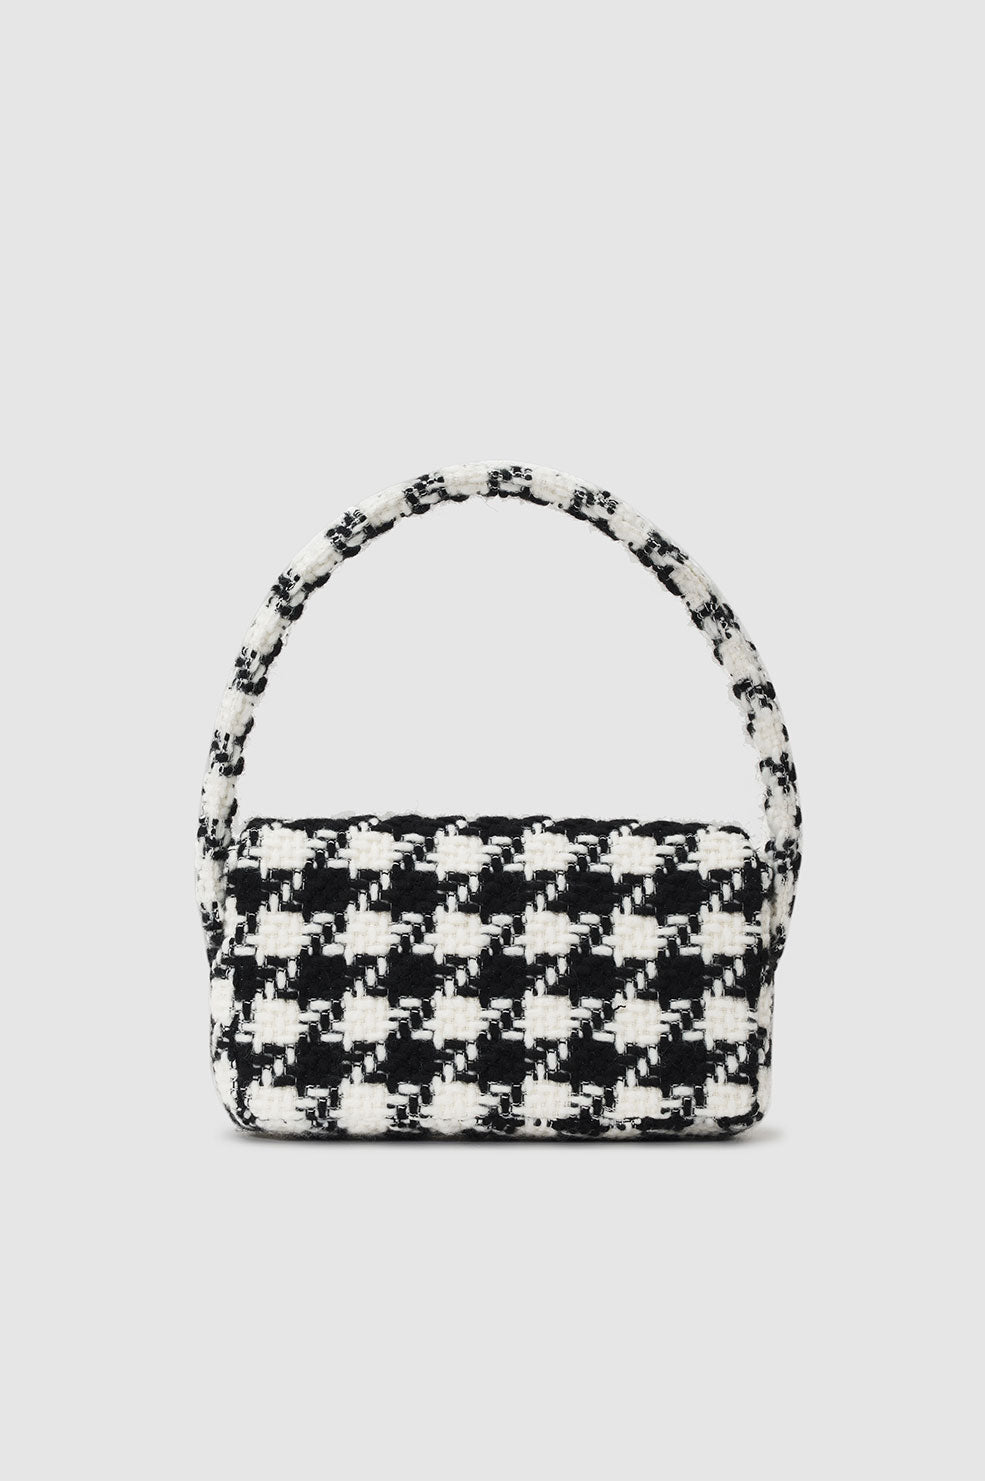 ANINE BING Nico Bag - Black And White Houndstooth - Back View